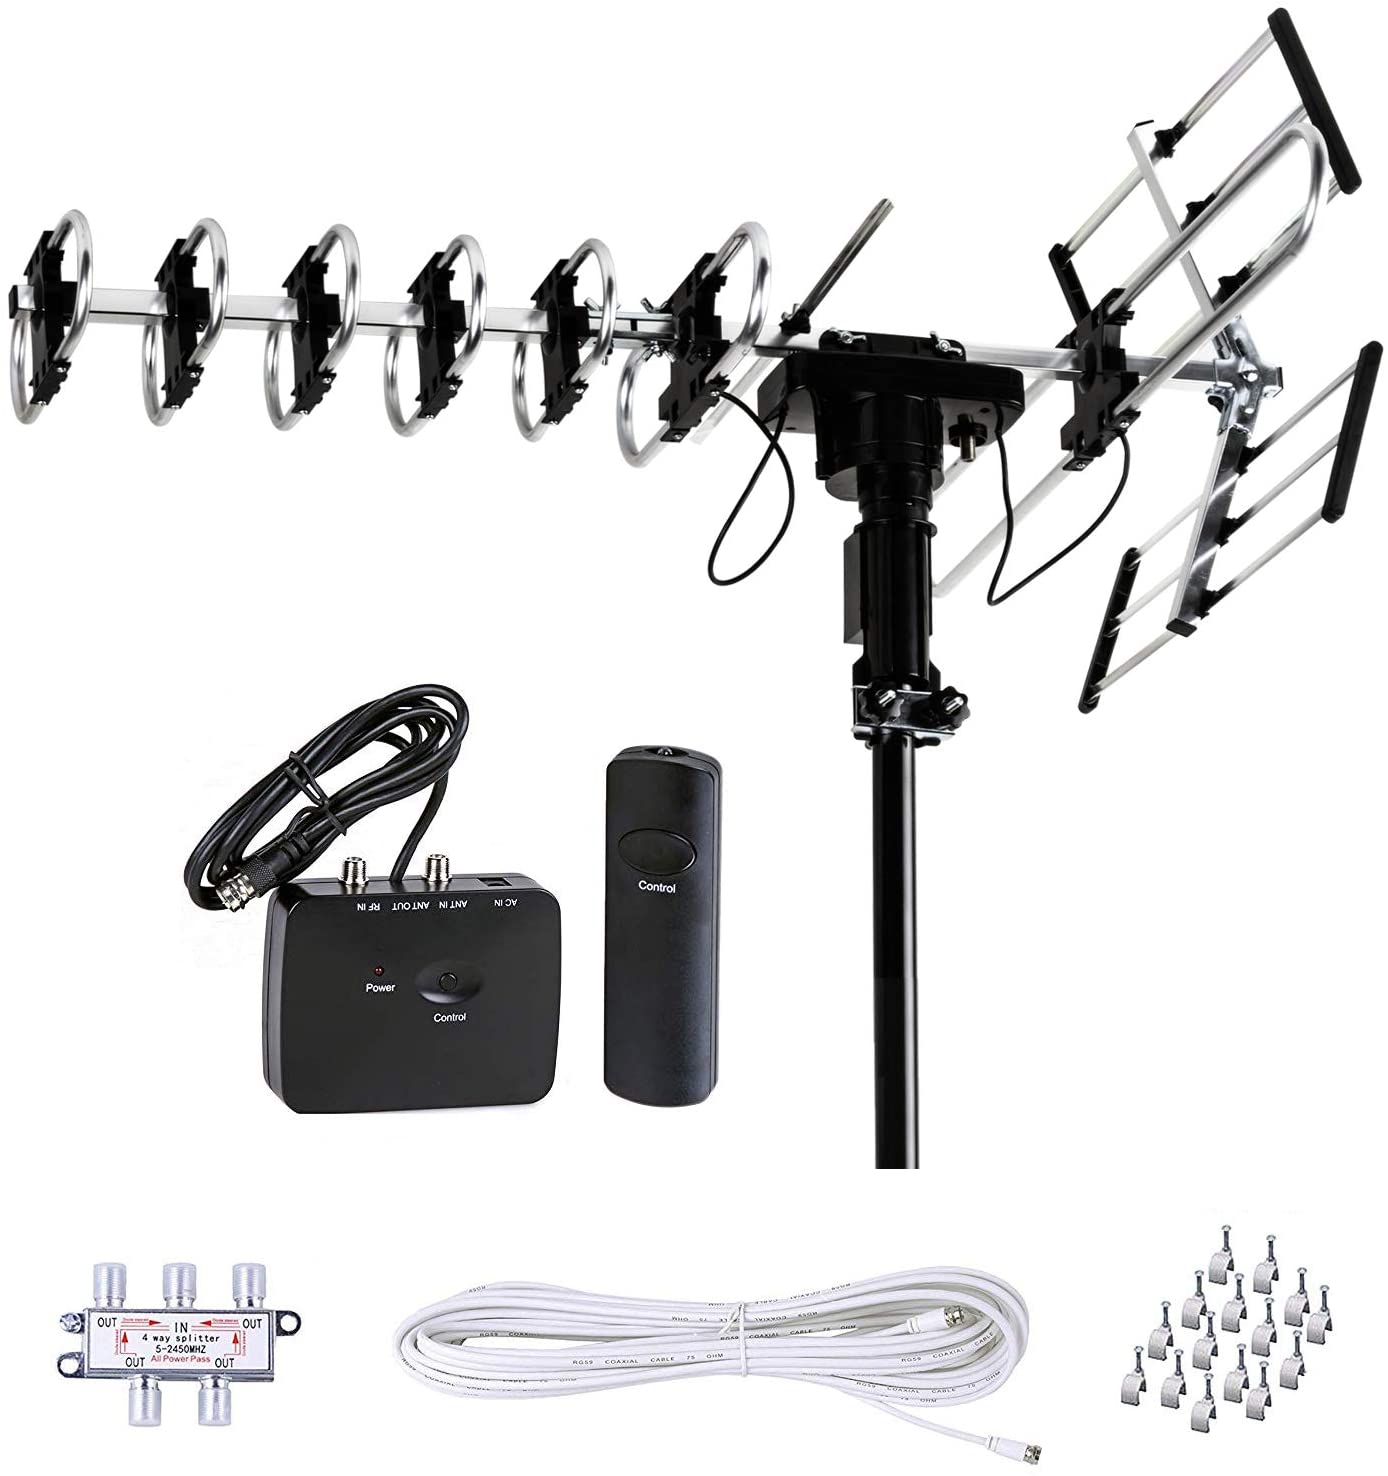 Best TV antennas for rural areas and tips for improving reception